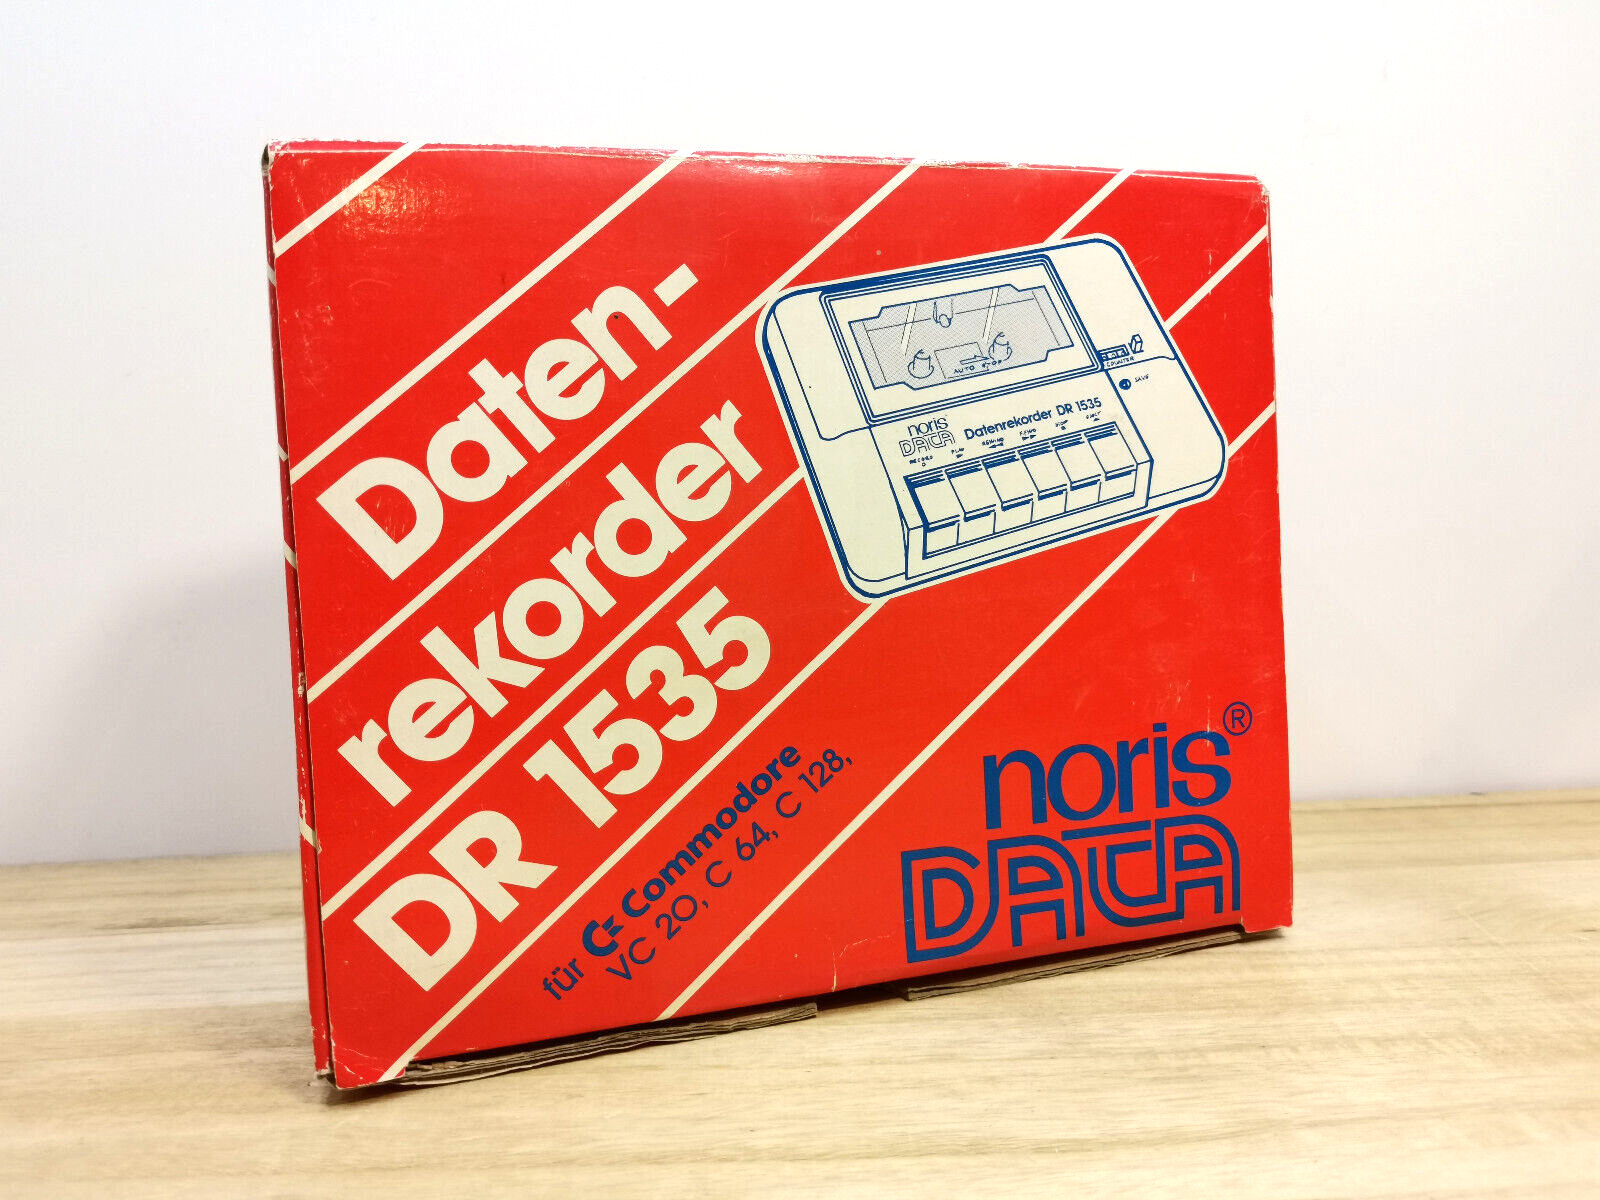 Accessory - Daten-Rekorder DR1535 for Commodore (VC20/ C64/ C128)( With Boxed)